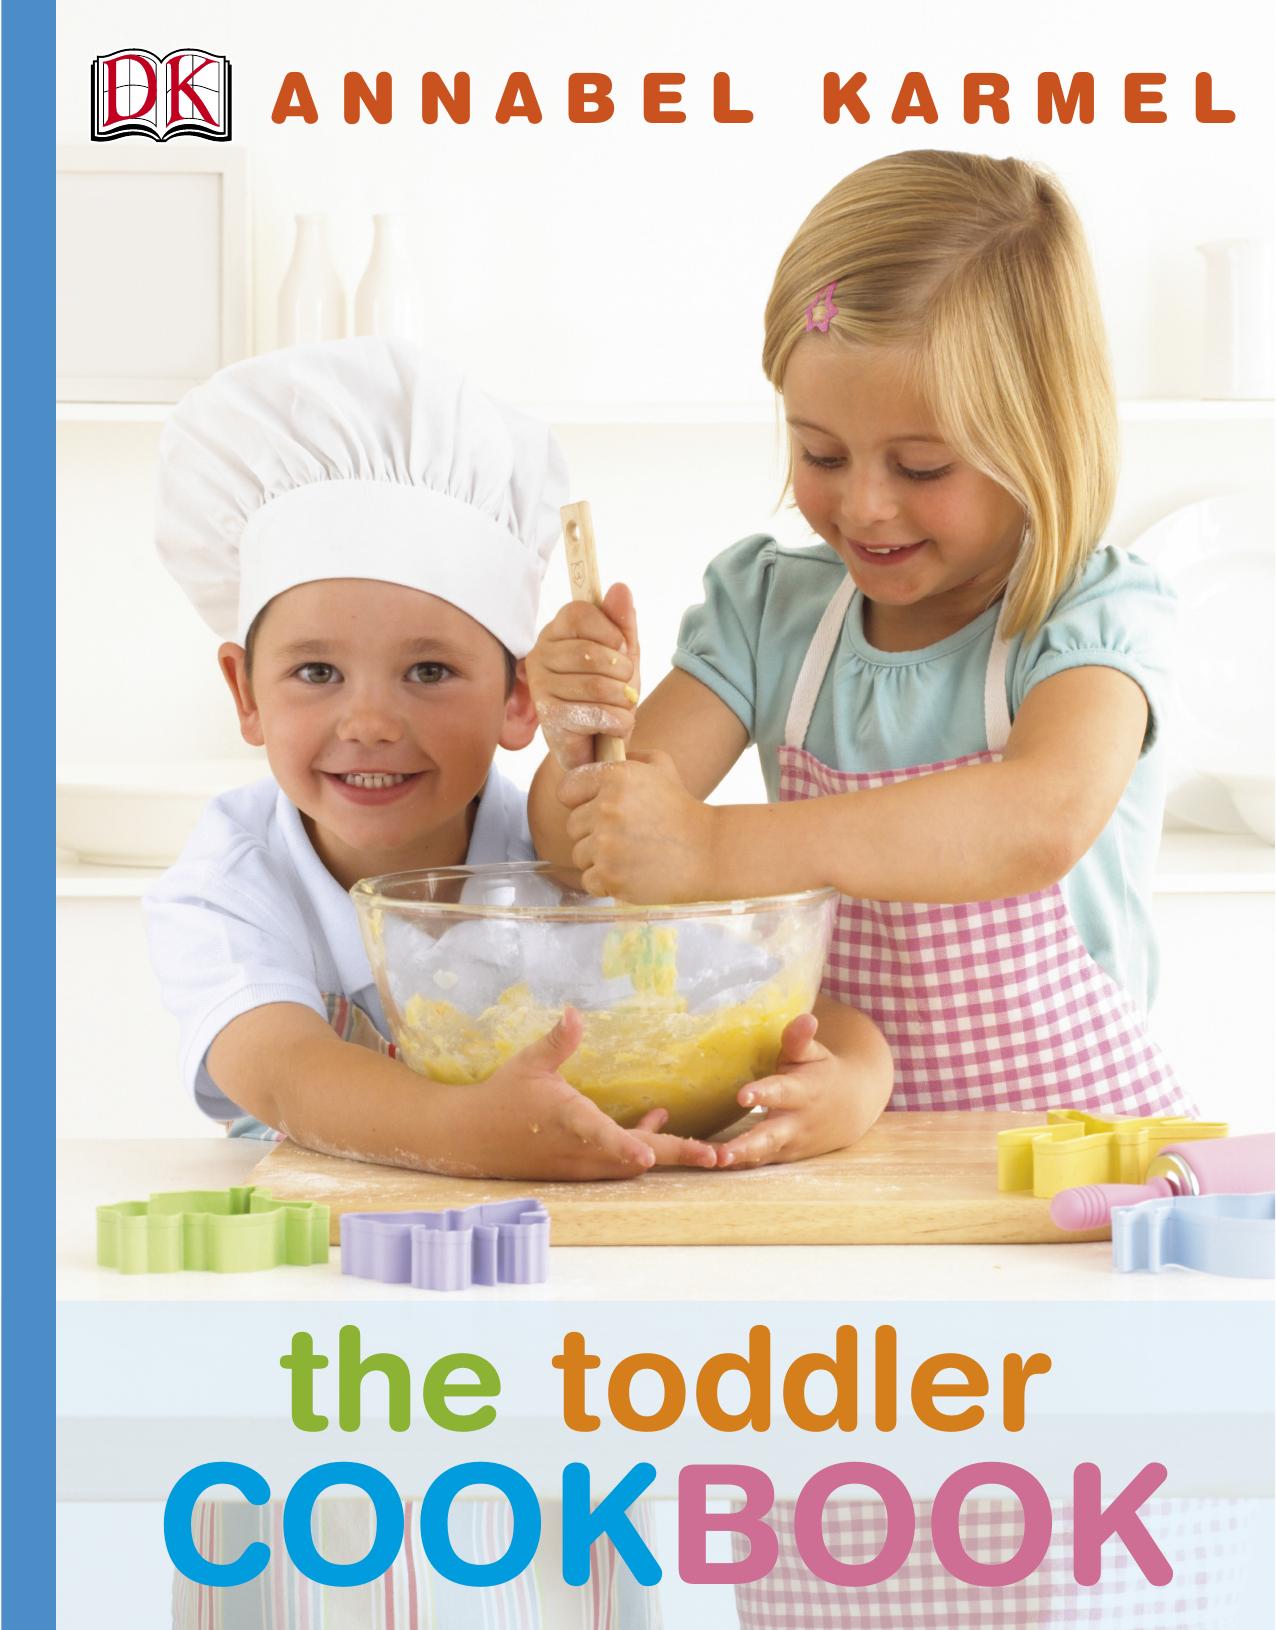 The Toddler Cookbook Ages 2-5 by Annabel Karmel